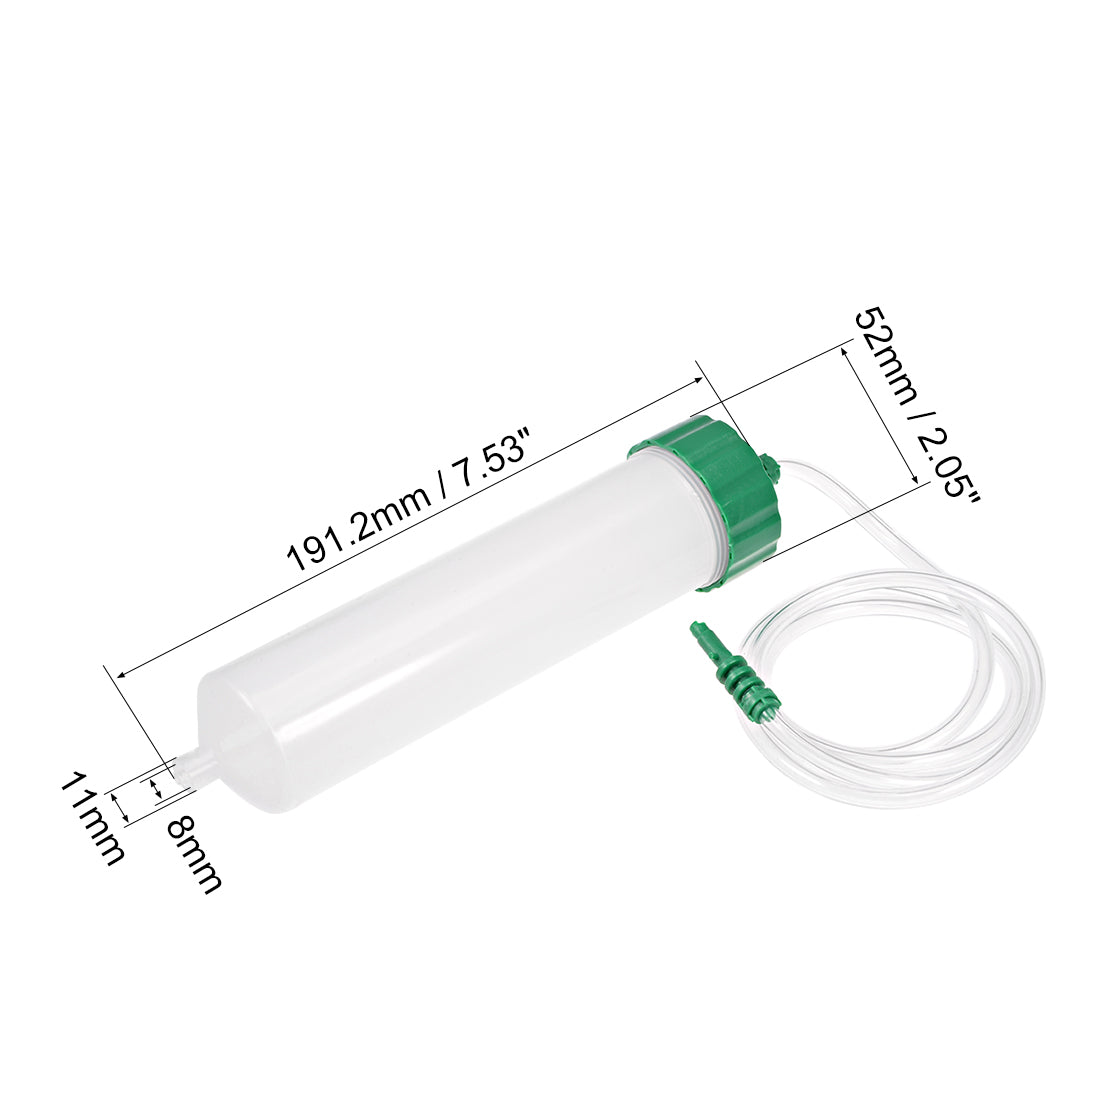 uxcell Uxcell Air Tubing Glue Dispenser Syringes 200cc Clear w Adapter for Industrial, 2 Pcs (Plastic Cover)